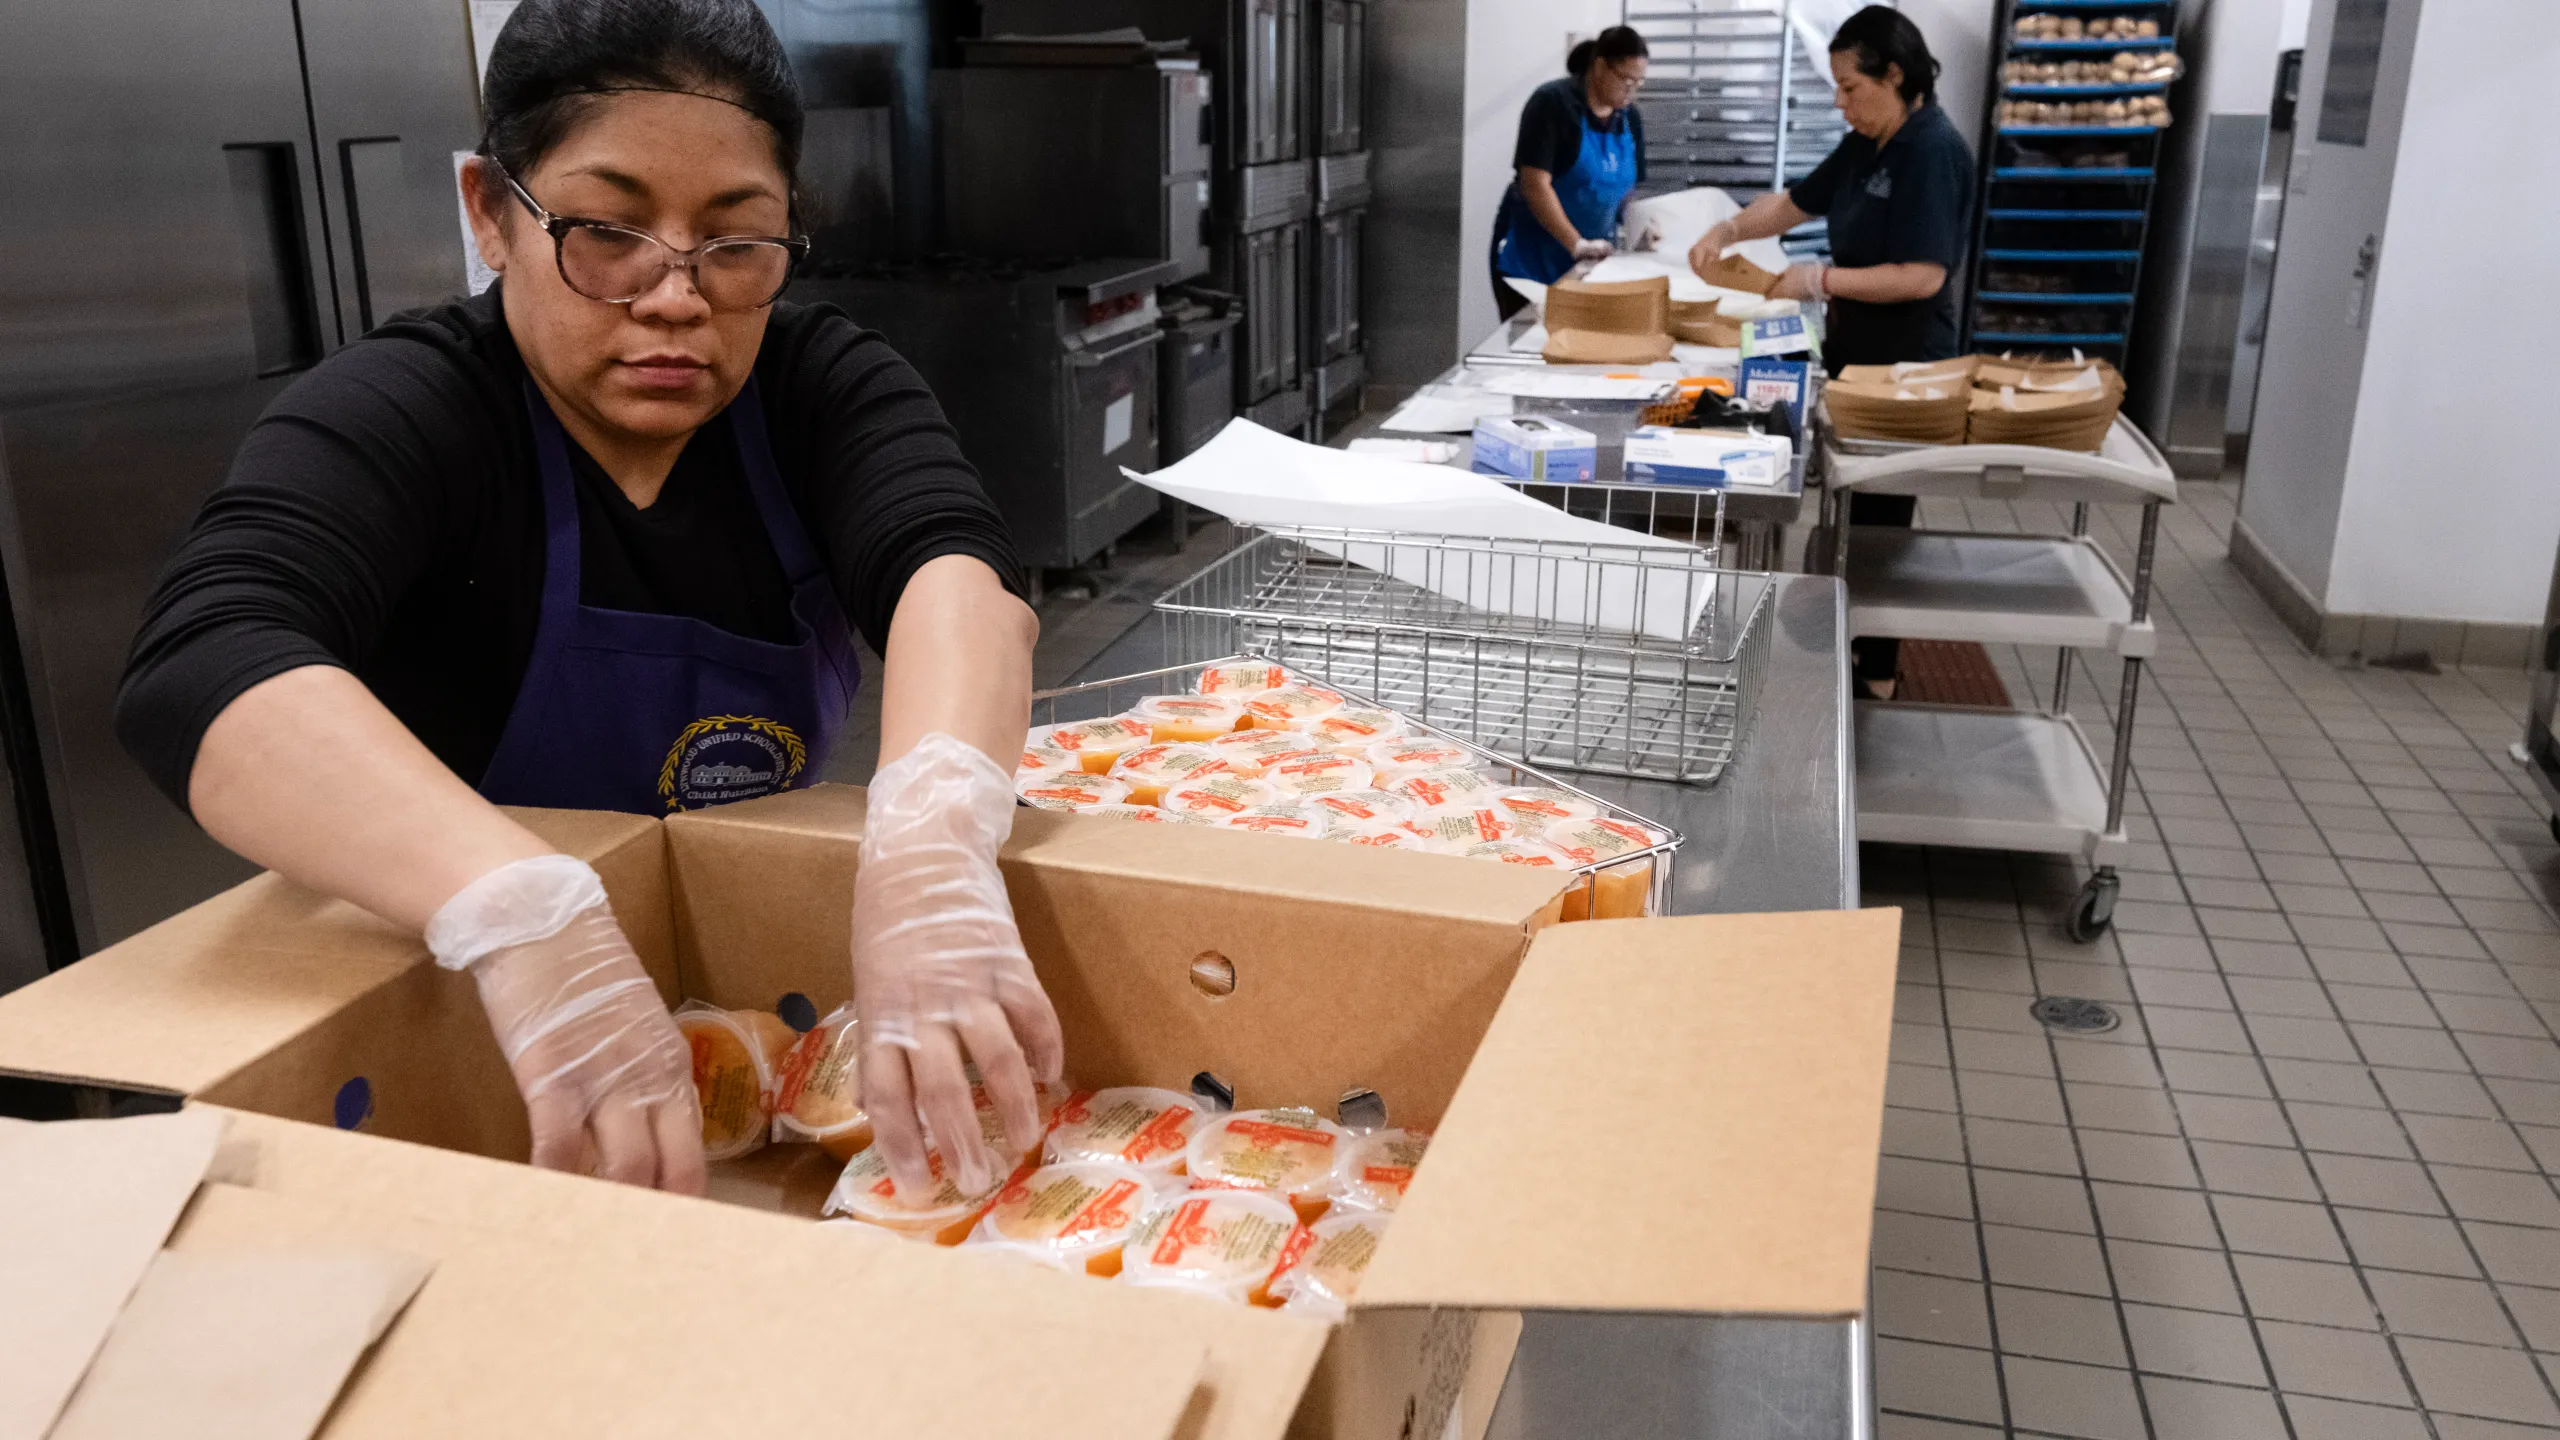 Why California Schools Are Losing Lunch Ladies to Burger Joints: The Fight to Keep Cafeteria Staff